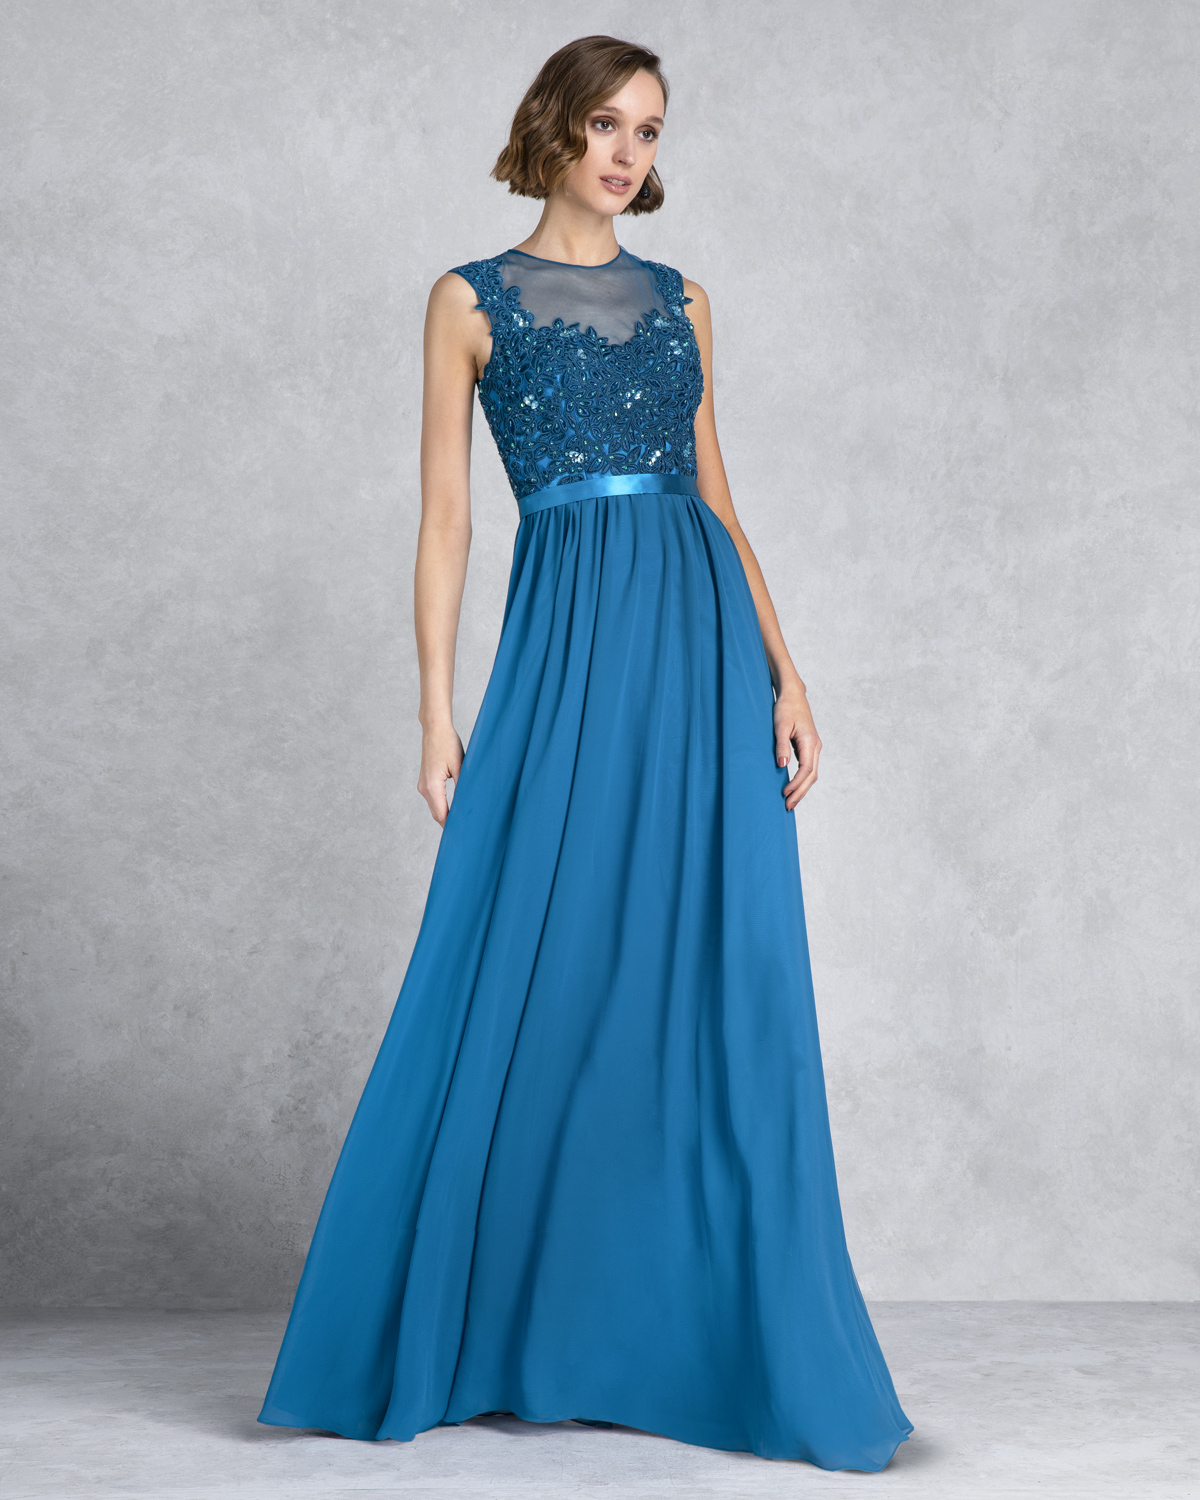 Classic Dresses / Long evening dress with lace on the top and chifon skirt